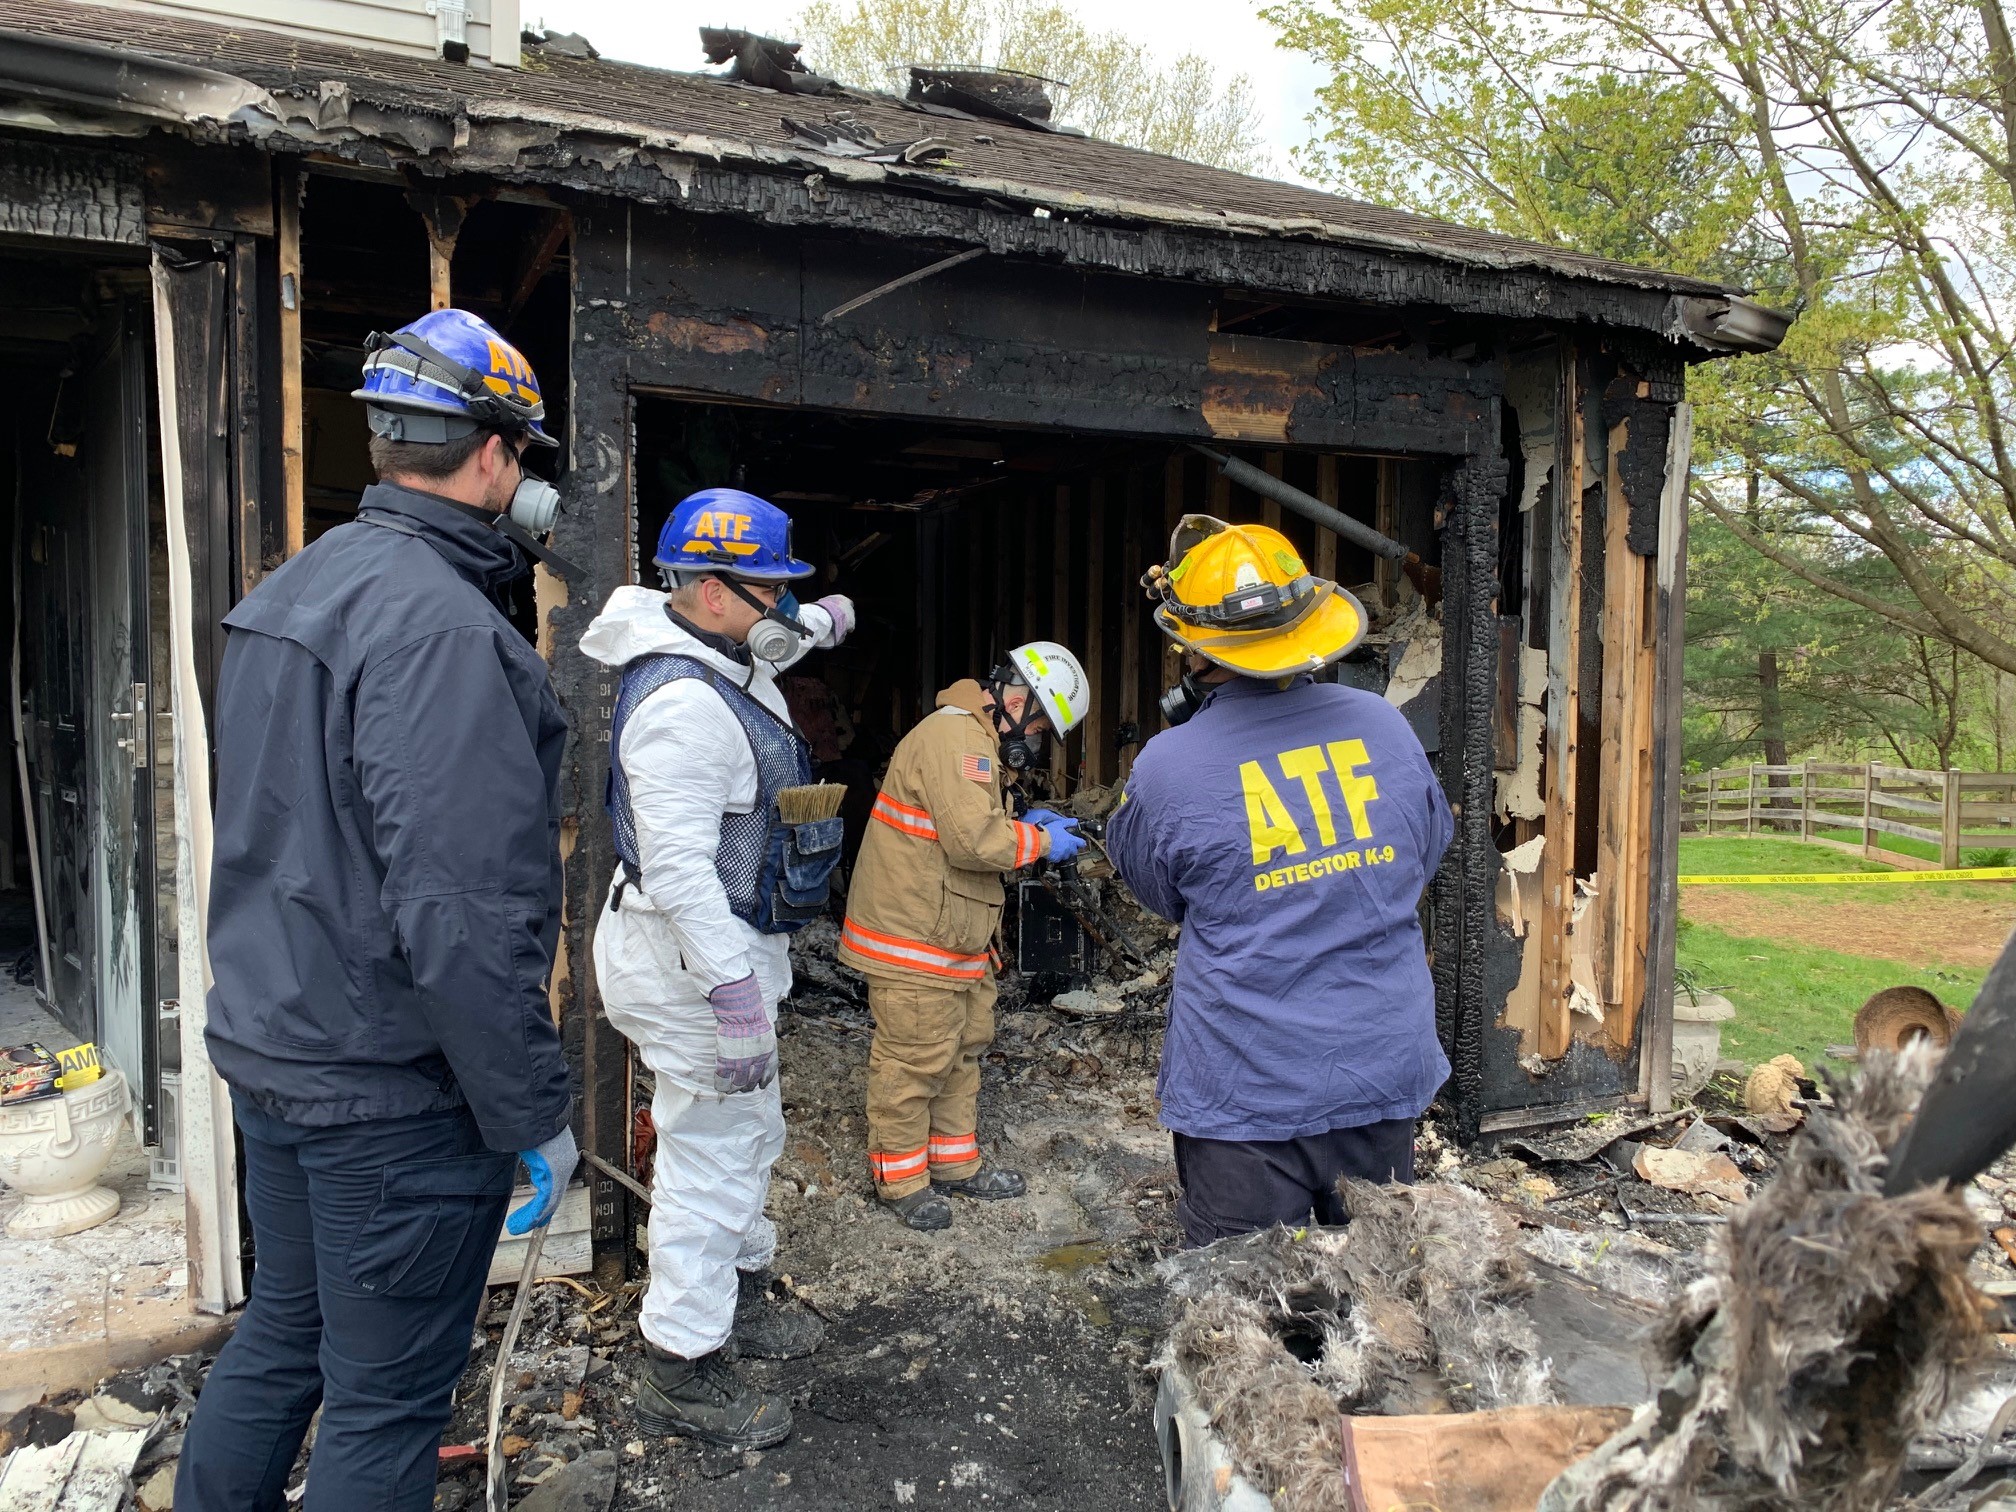 Investigators collaborating with ATF and on-scene fireman